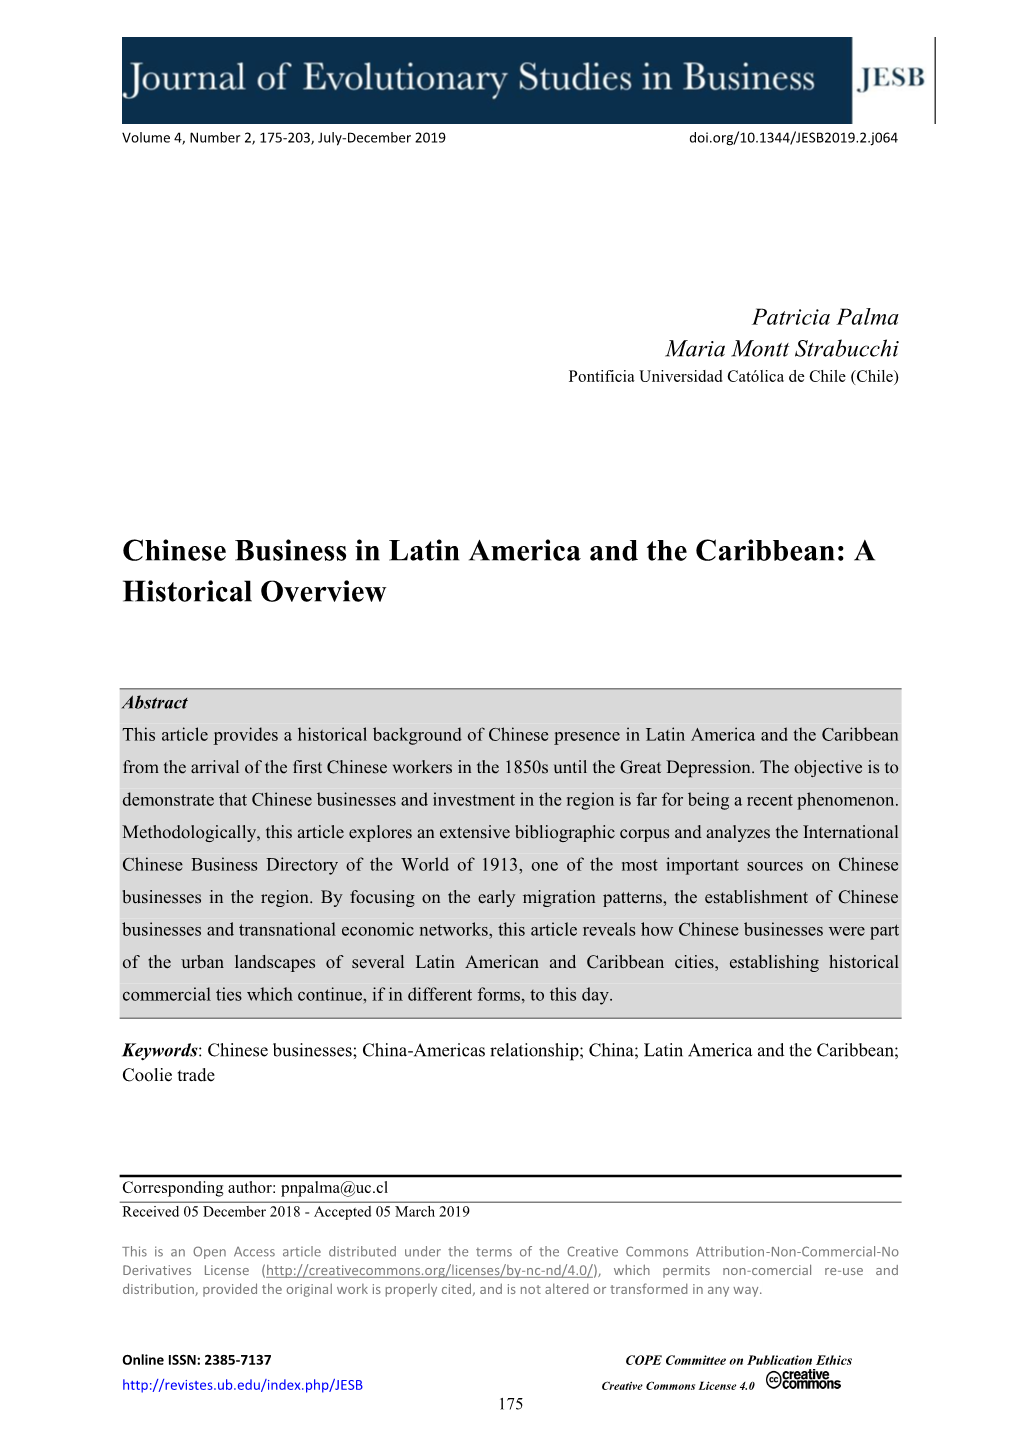 Chinese Business in Latin America and the Caribbean: a Historical Overview